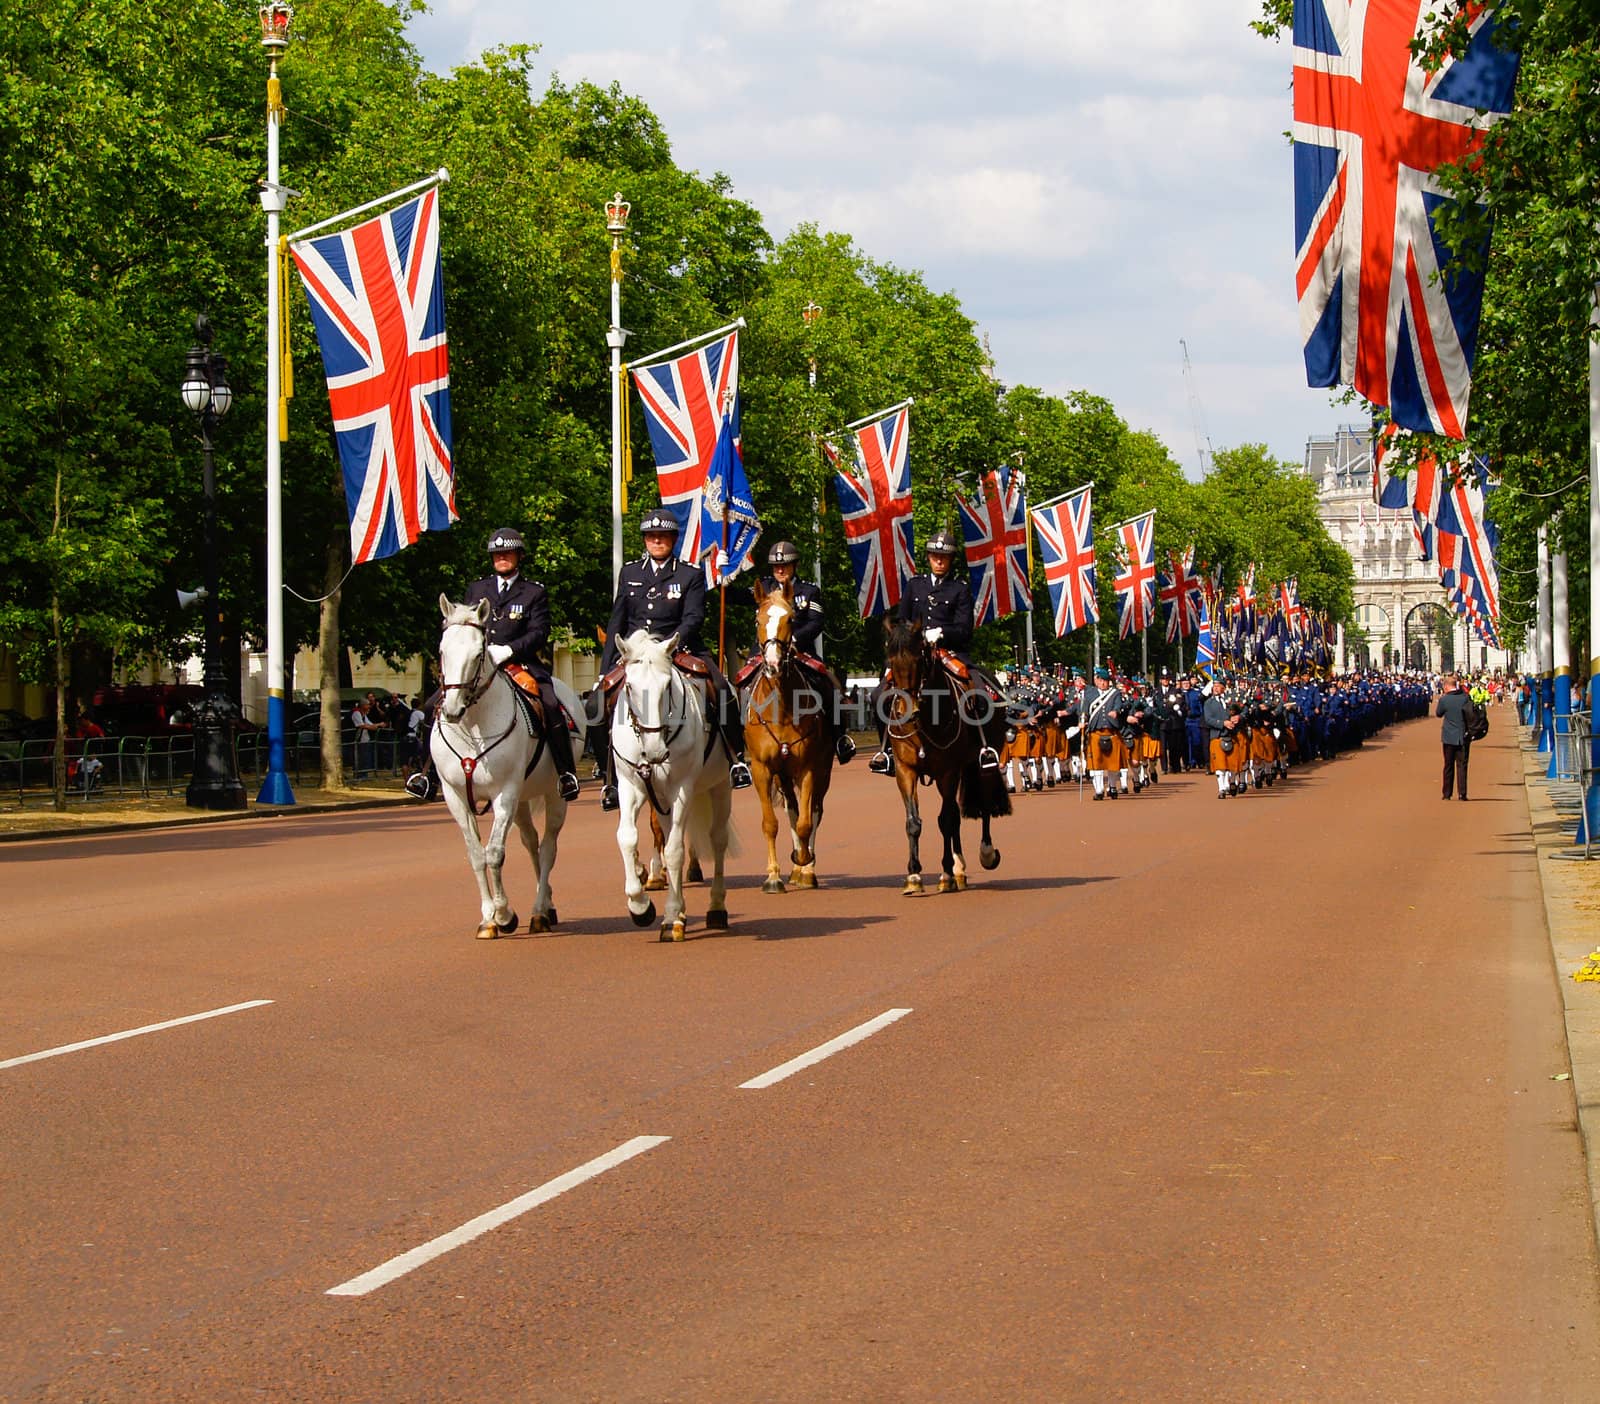 Band of marching bagpipers are lead along London's Mall by mounted flag bearers.